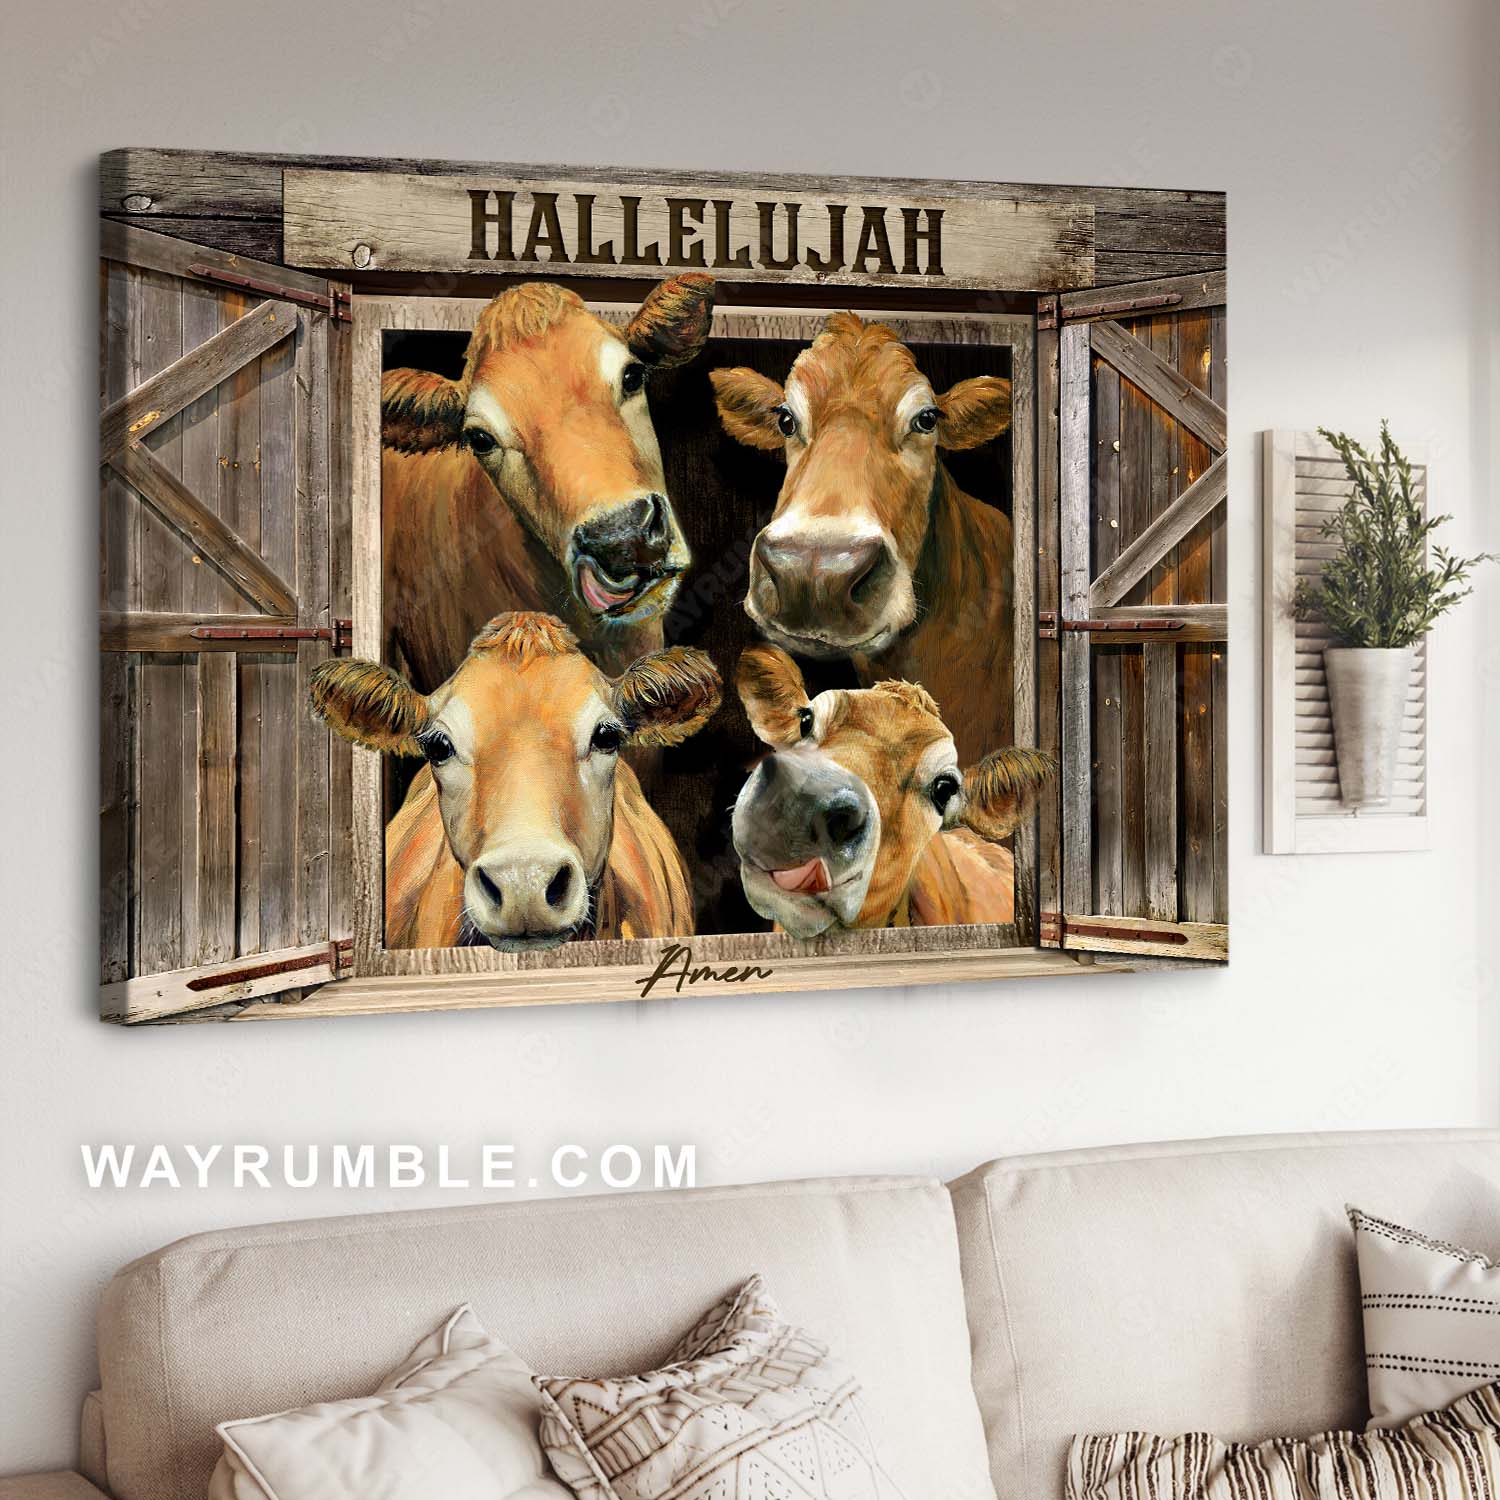 Farmhouse Kitchen Decor Wall Art Funny Kitchen Signs Black and White Canvas Funny Donkey Animal Pictures Rustic Farmhouse Style Wall Decor for